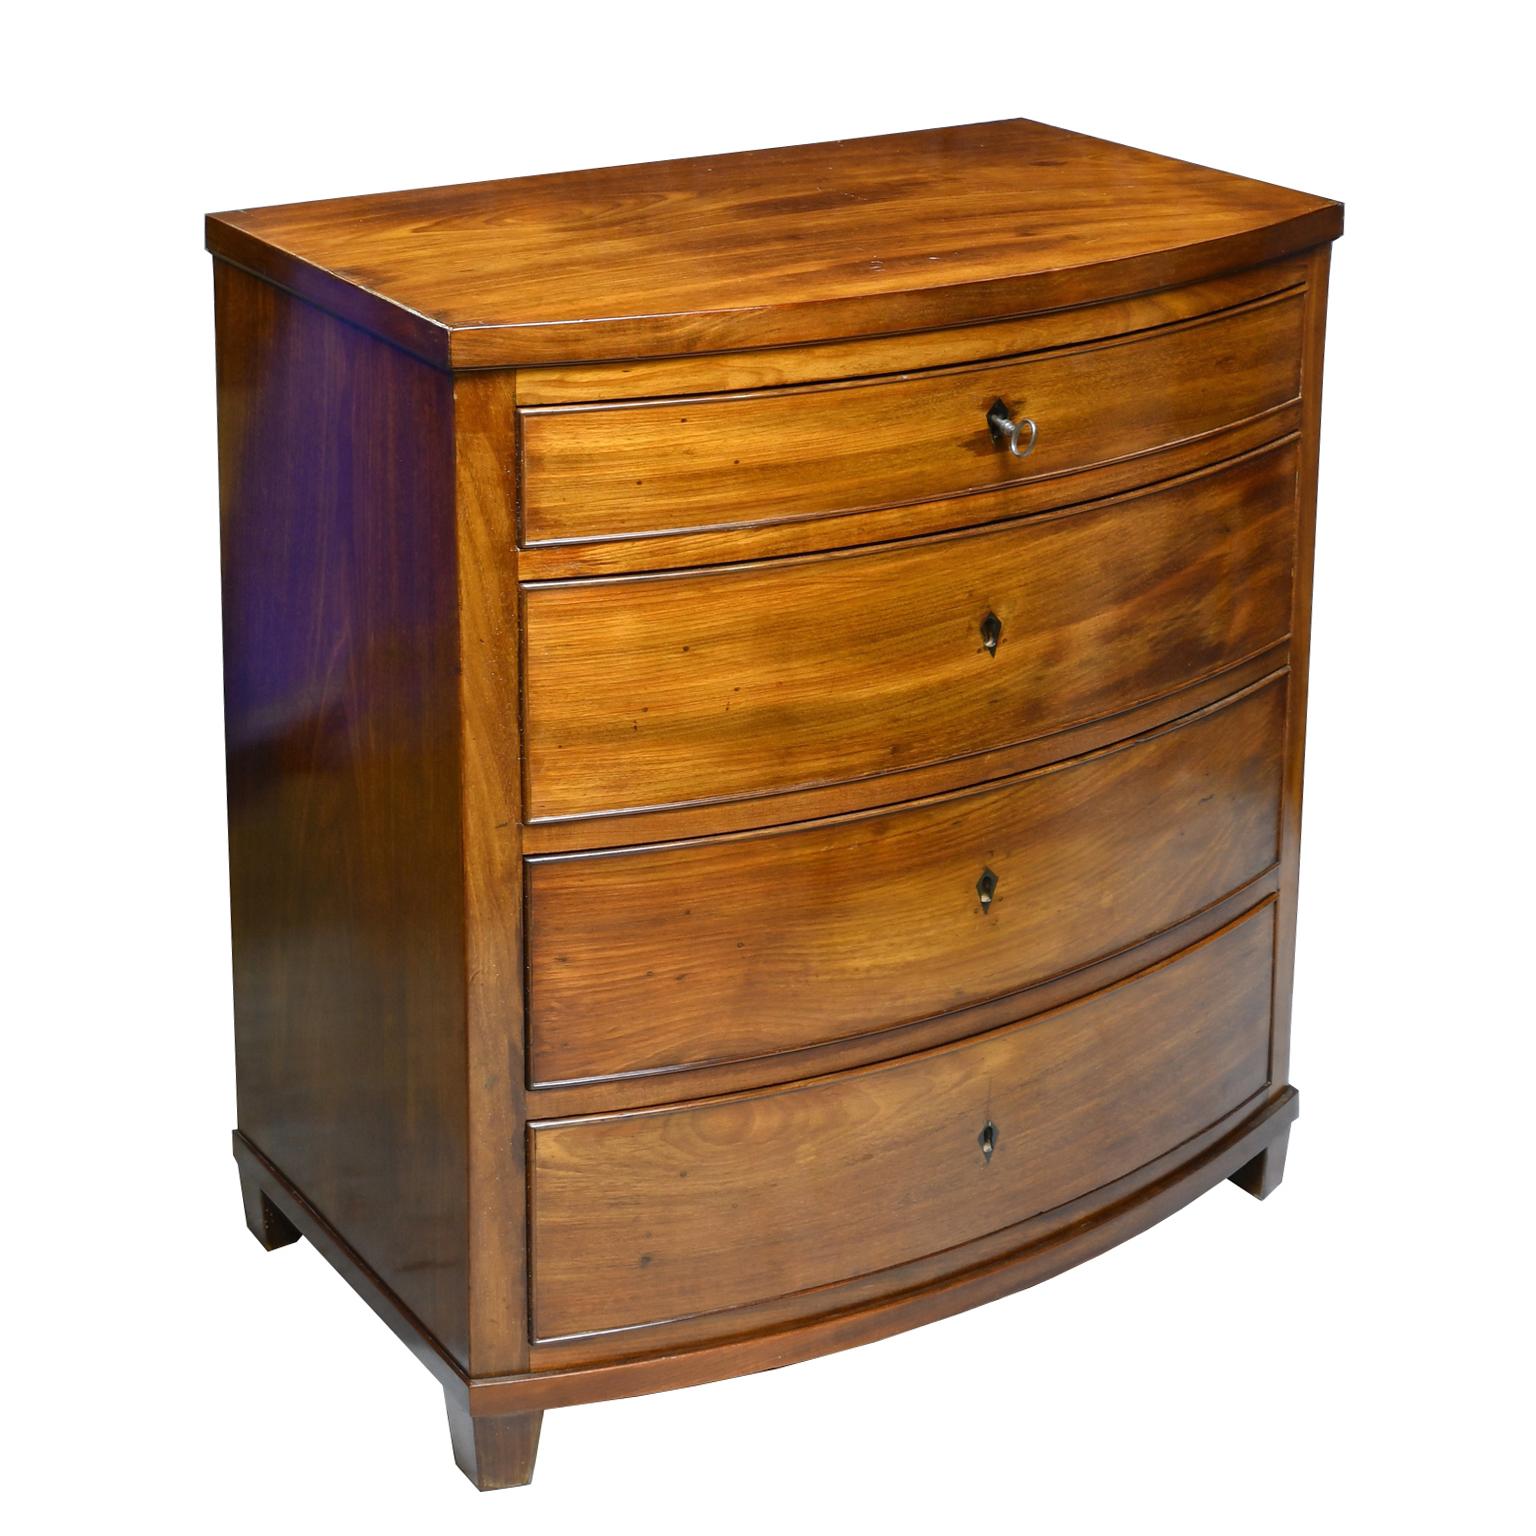 Hand-Crafted Small Antique Empire Chest of Drawers/Nightstand in West Indies Mahogany, c 1810